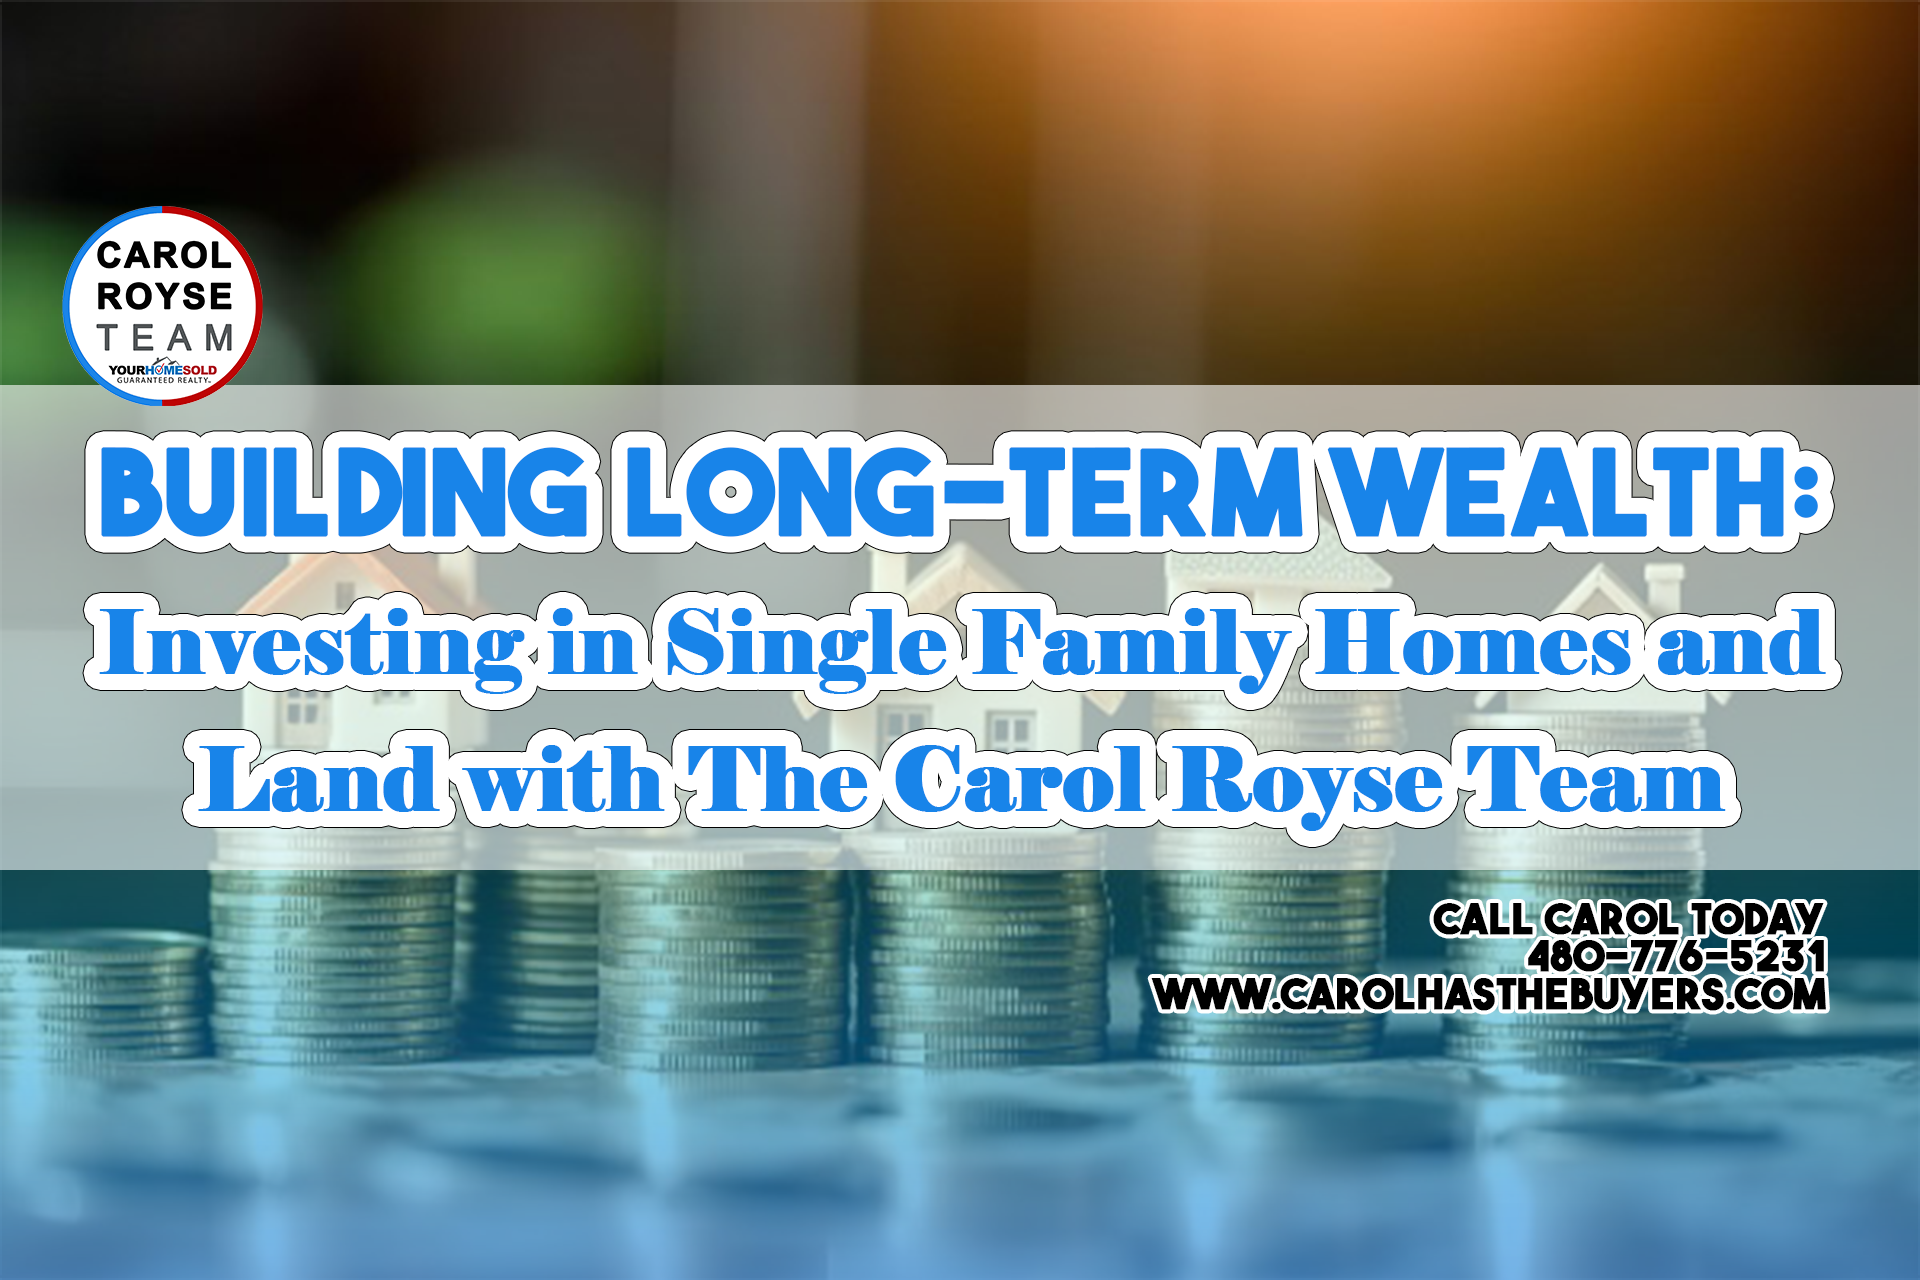 Building Long-Term Wealth: Investing in Single Family Homes and Land with The Carol Royse Team